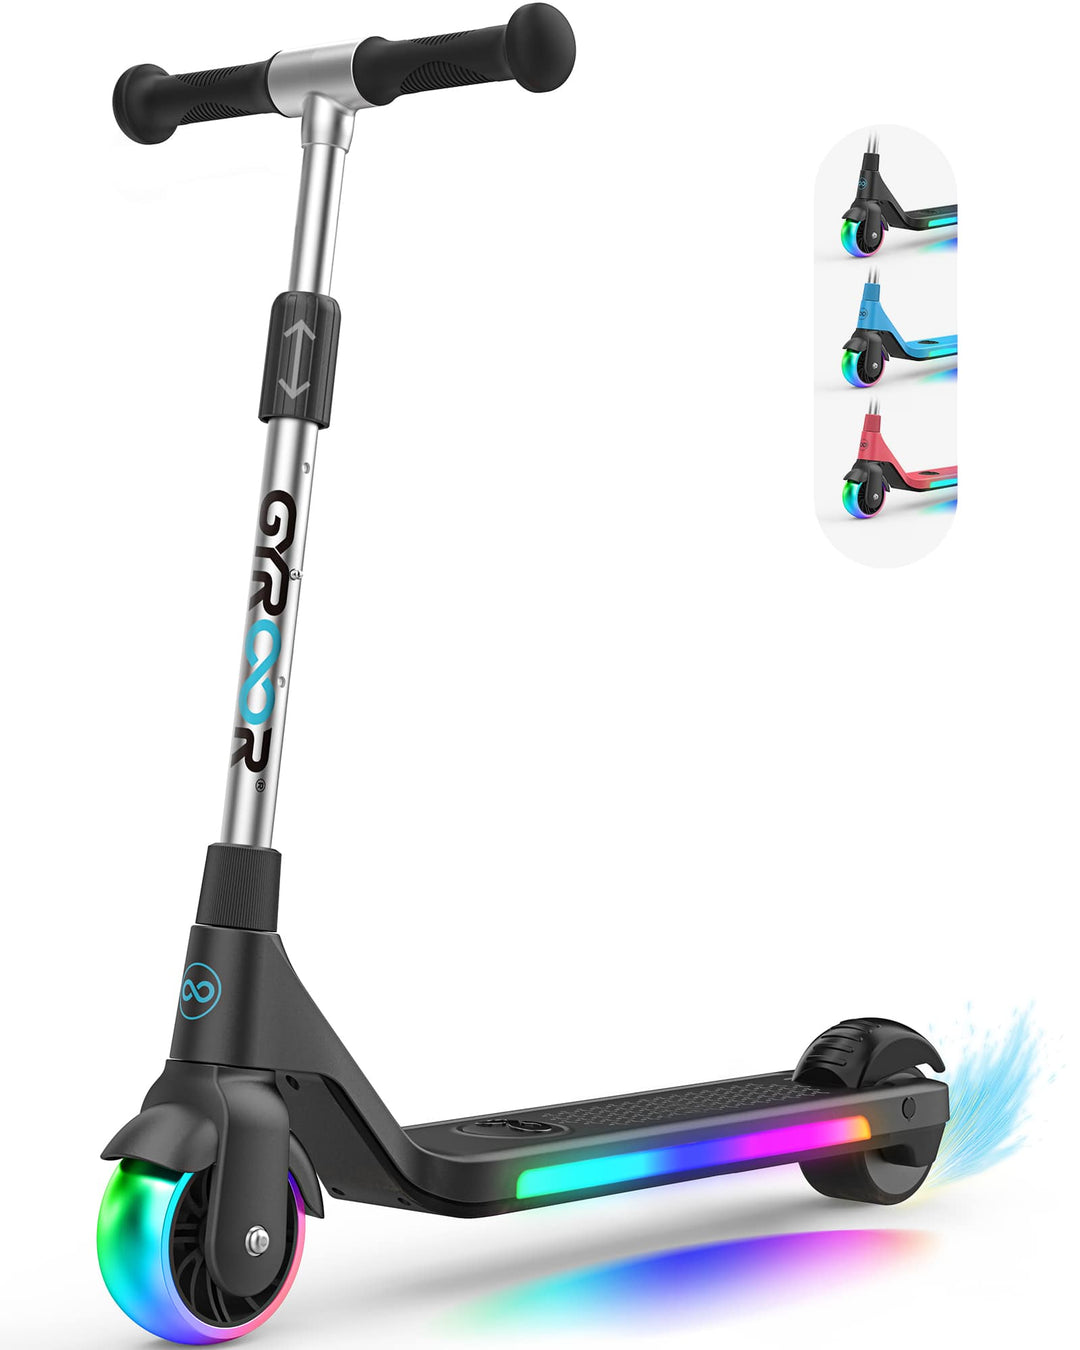 Kids electric scooter - electric scooter for kids 6-12 years old - Gyroor H30